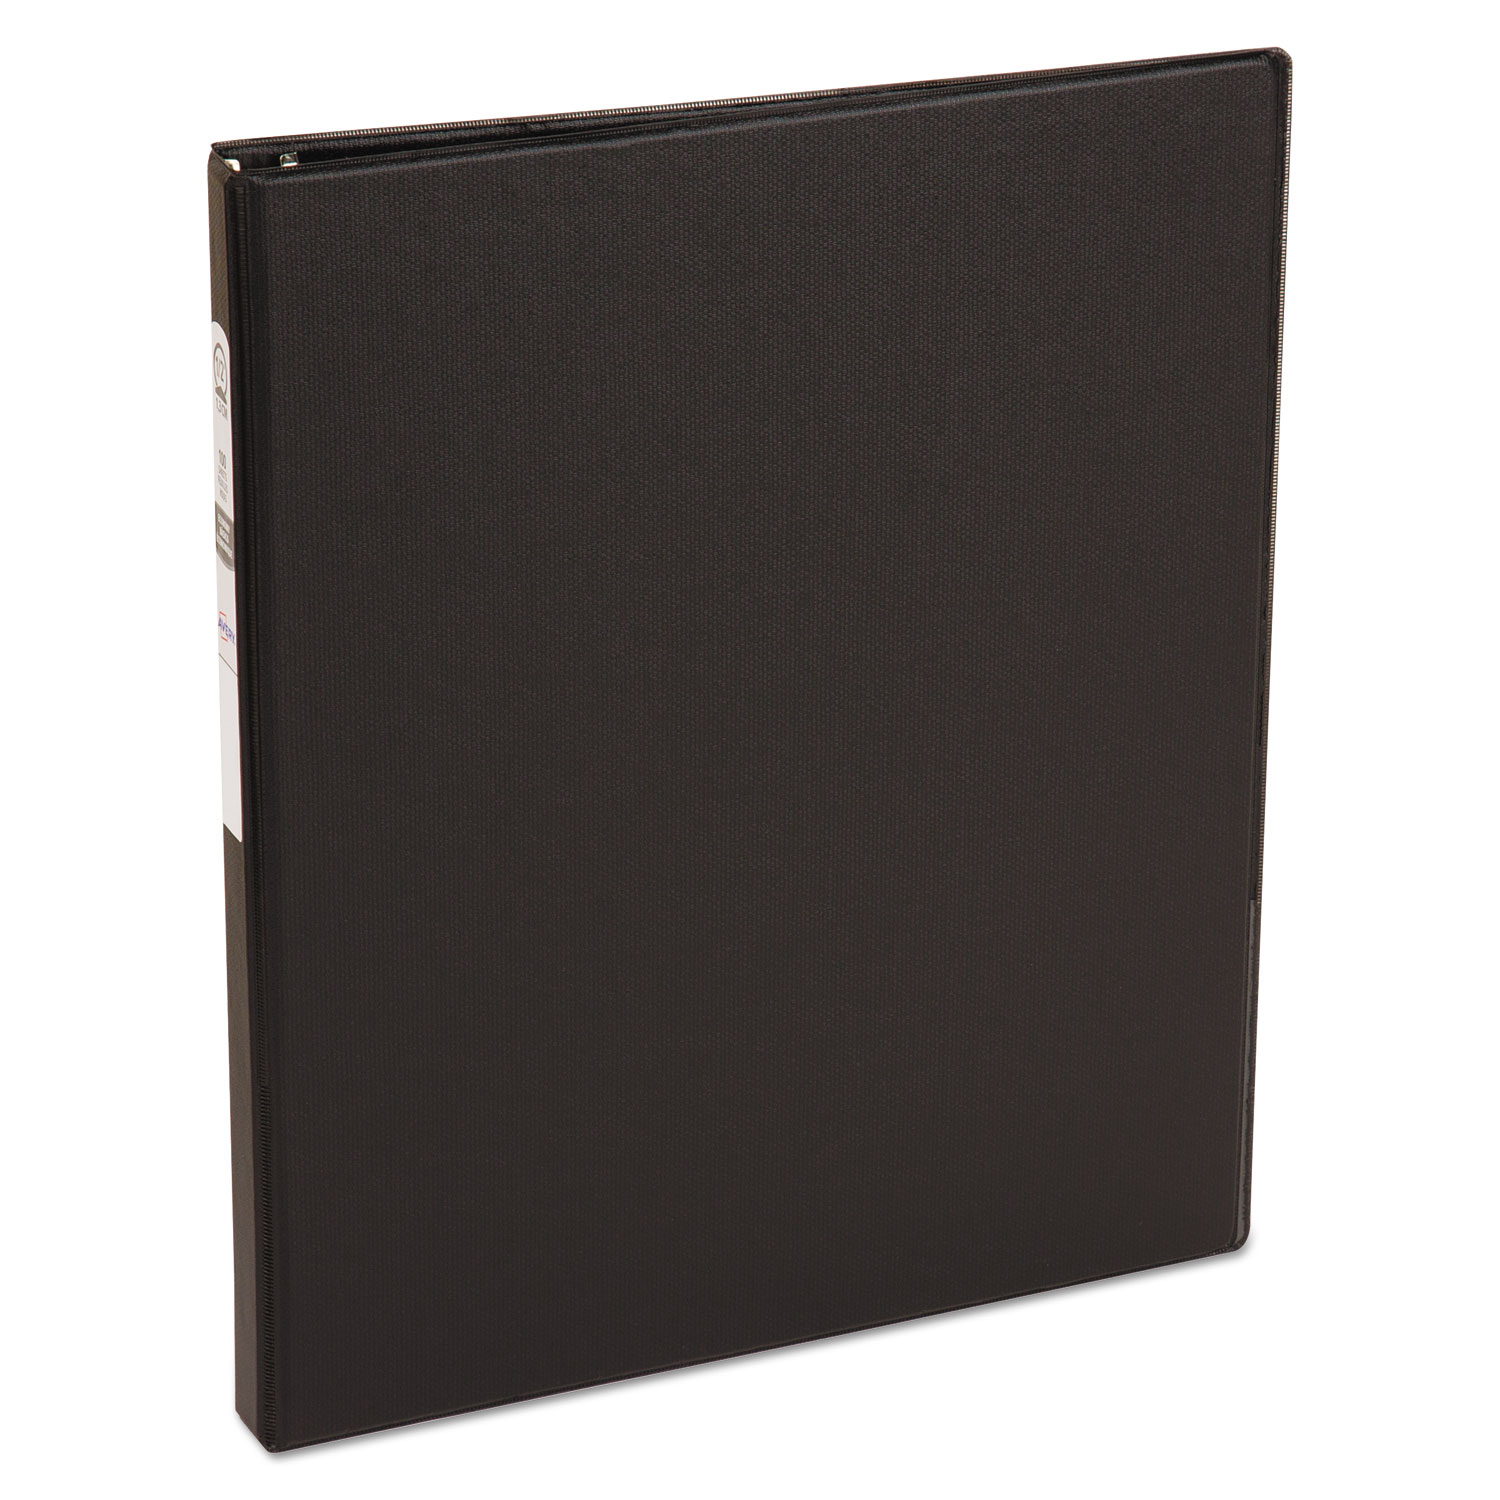  Avery 03201 Economy Non-View Binder with Round Rings, 3 Rings, 0.5 Capacity, 11 x 8.5, Black (AVE03201) 